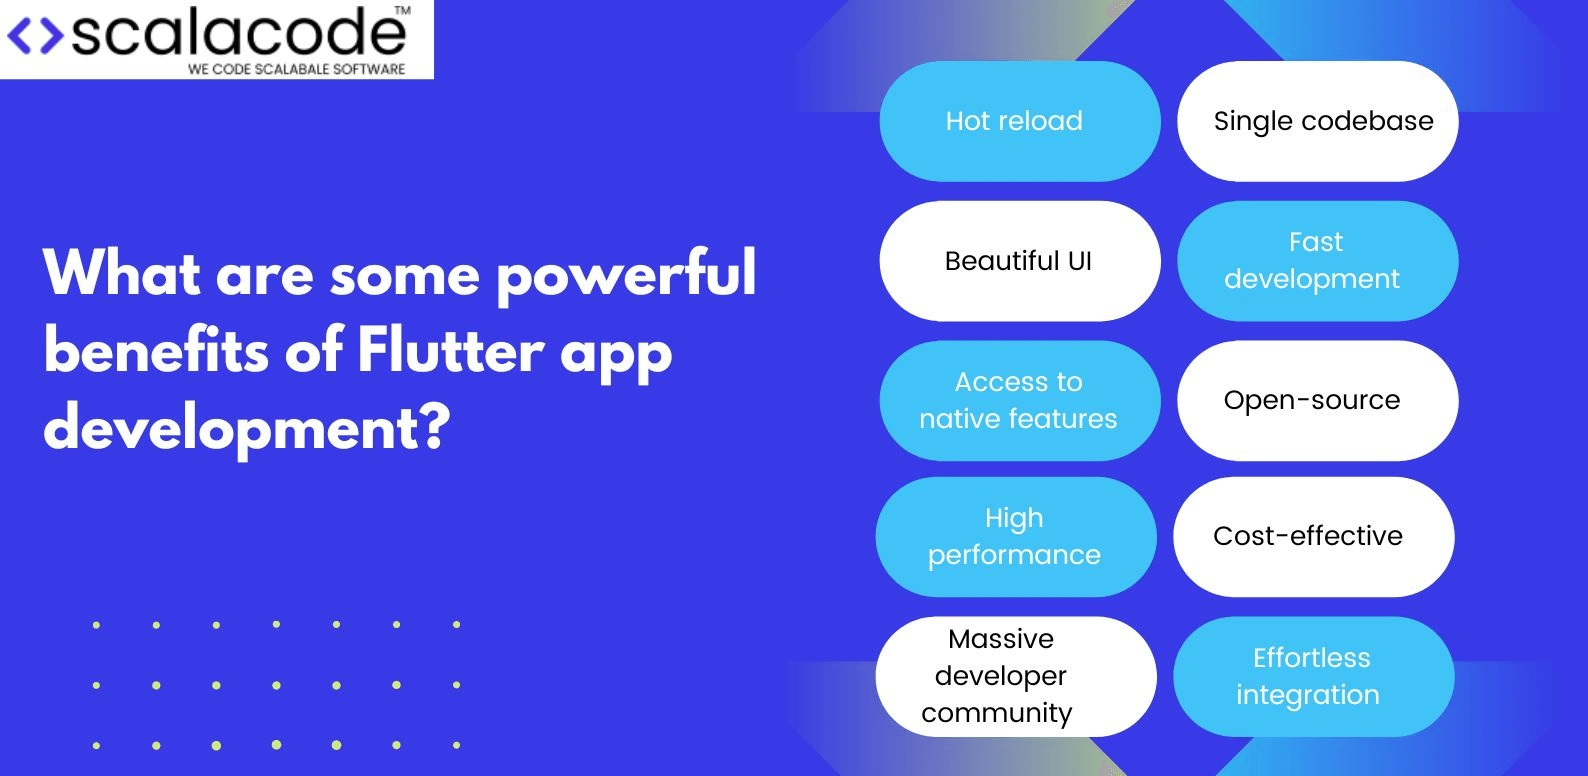 What are some powerful benefits of Flutter app development